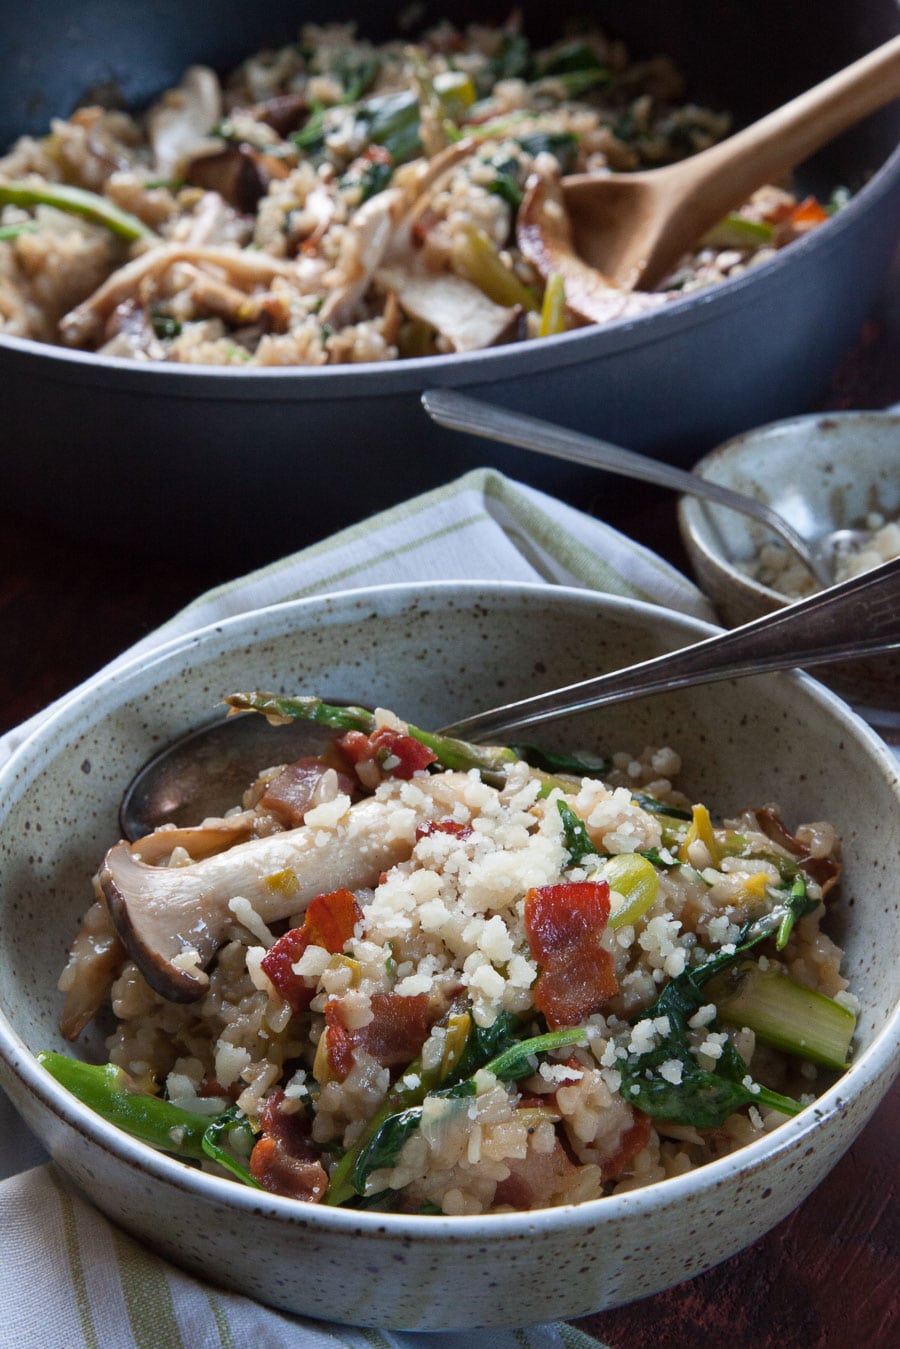 Asparagus, Bacon and Mushroom Risotto. Photo and recipe by Irvin Lin of Eat the Love.